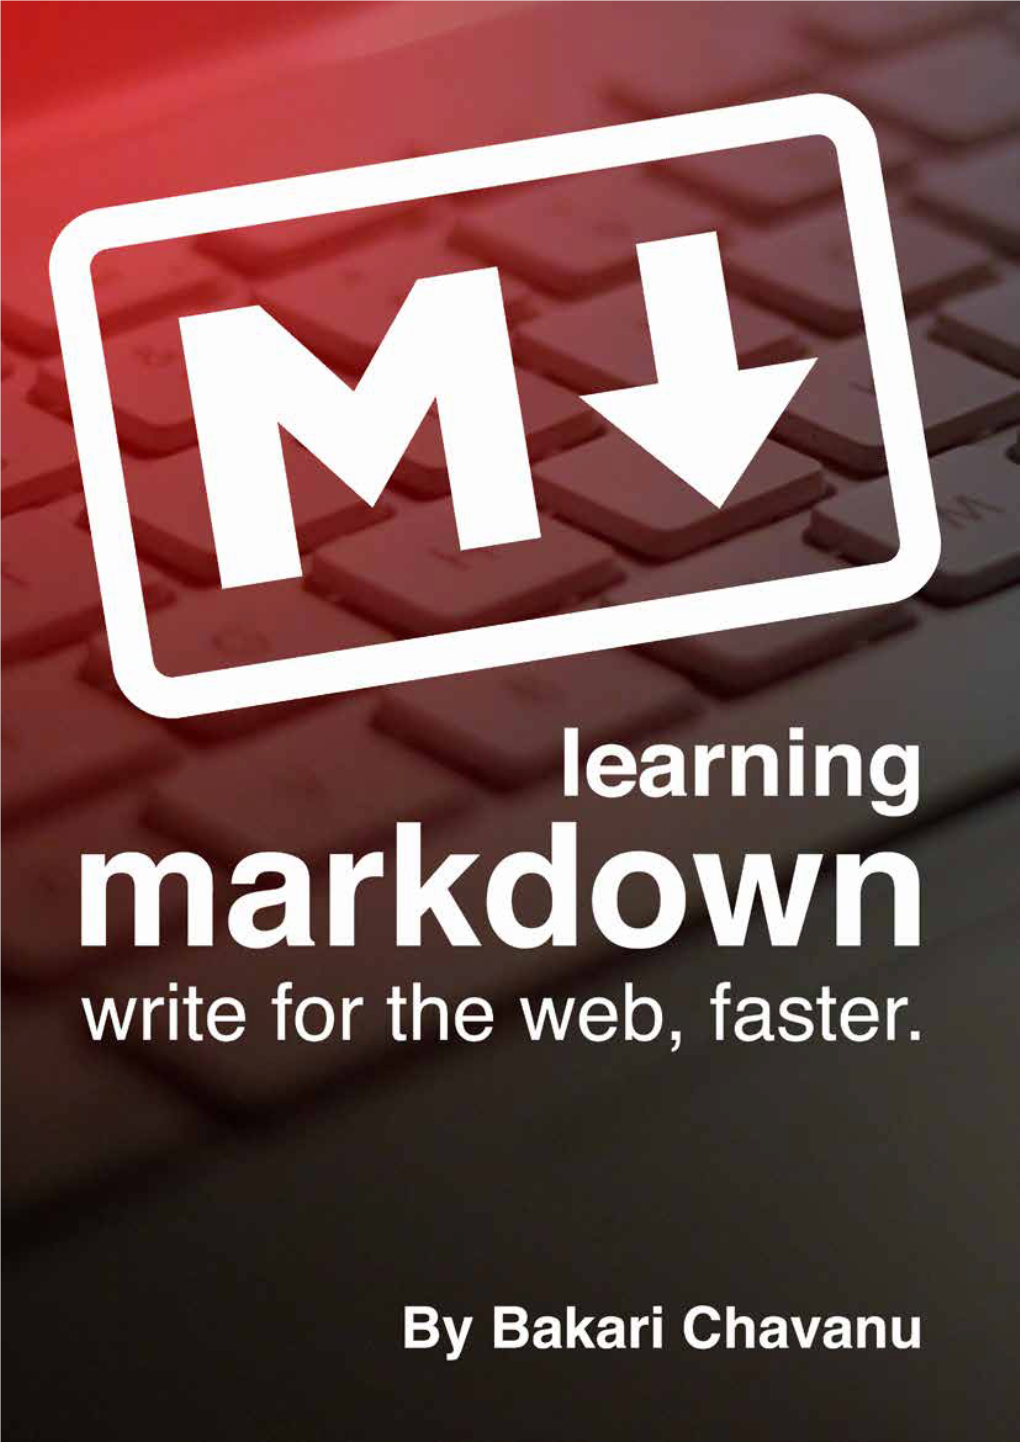 Why Use Markdown? 5